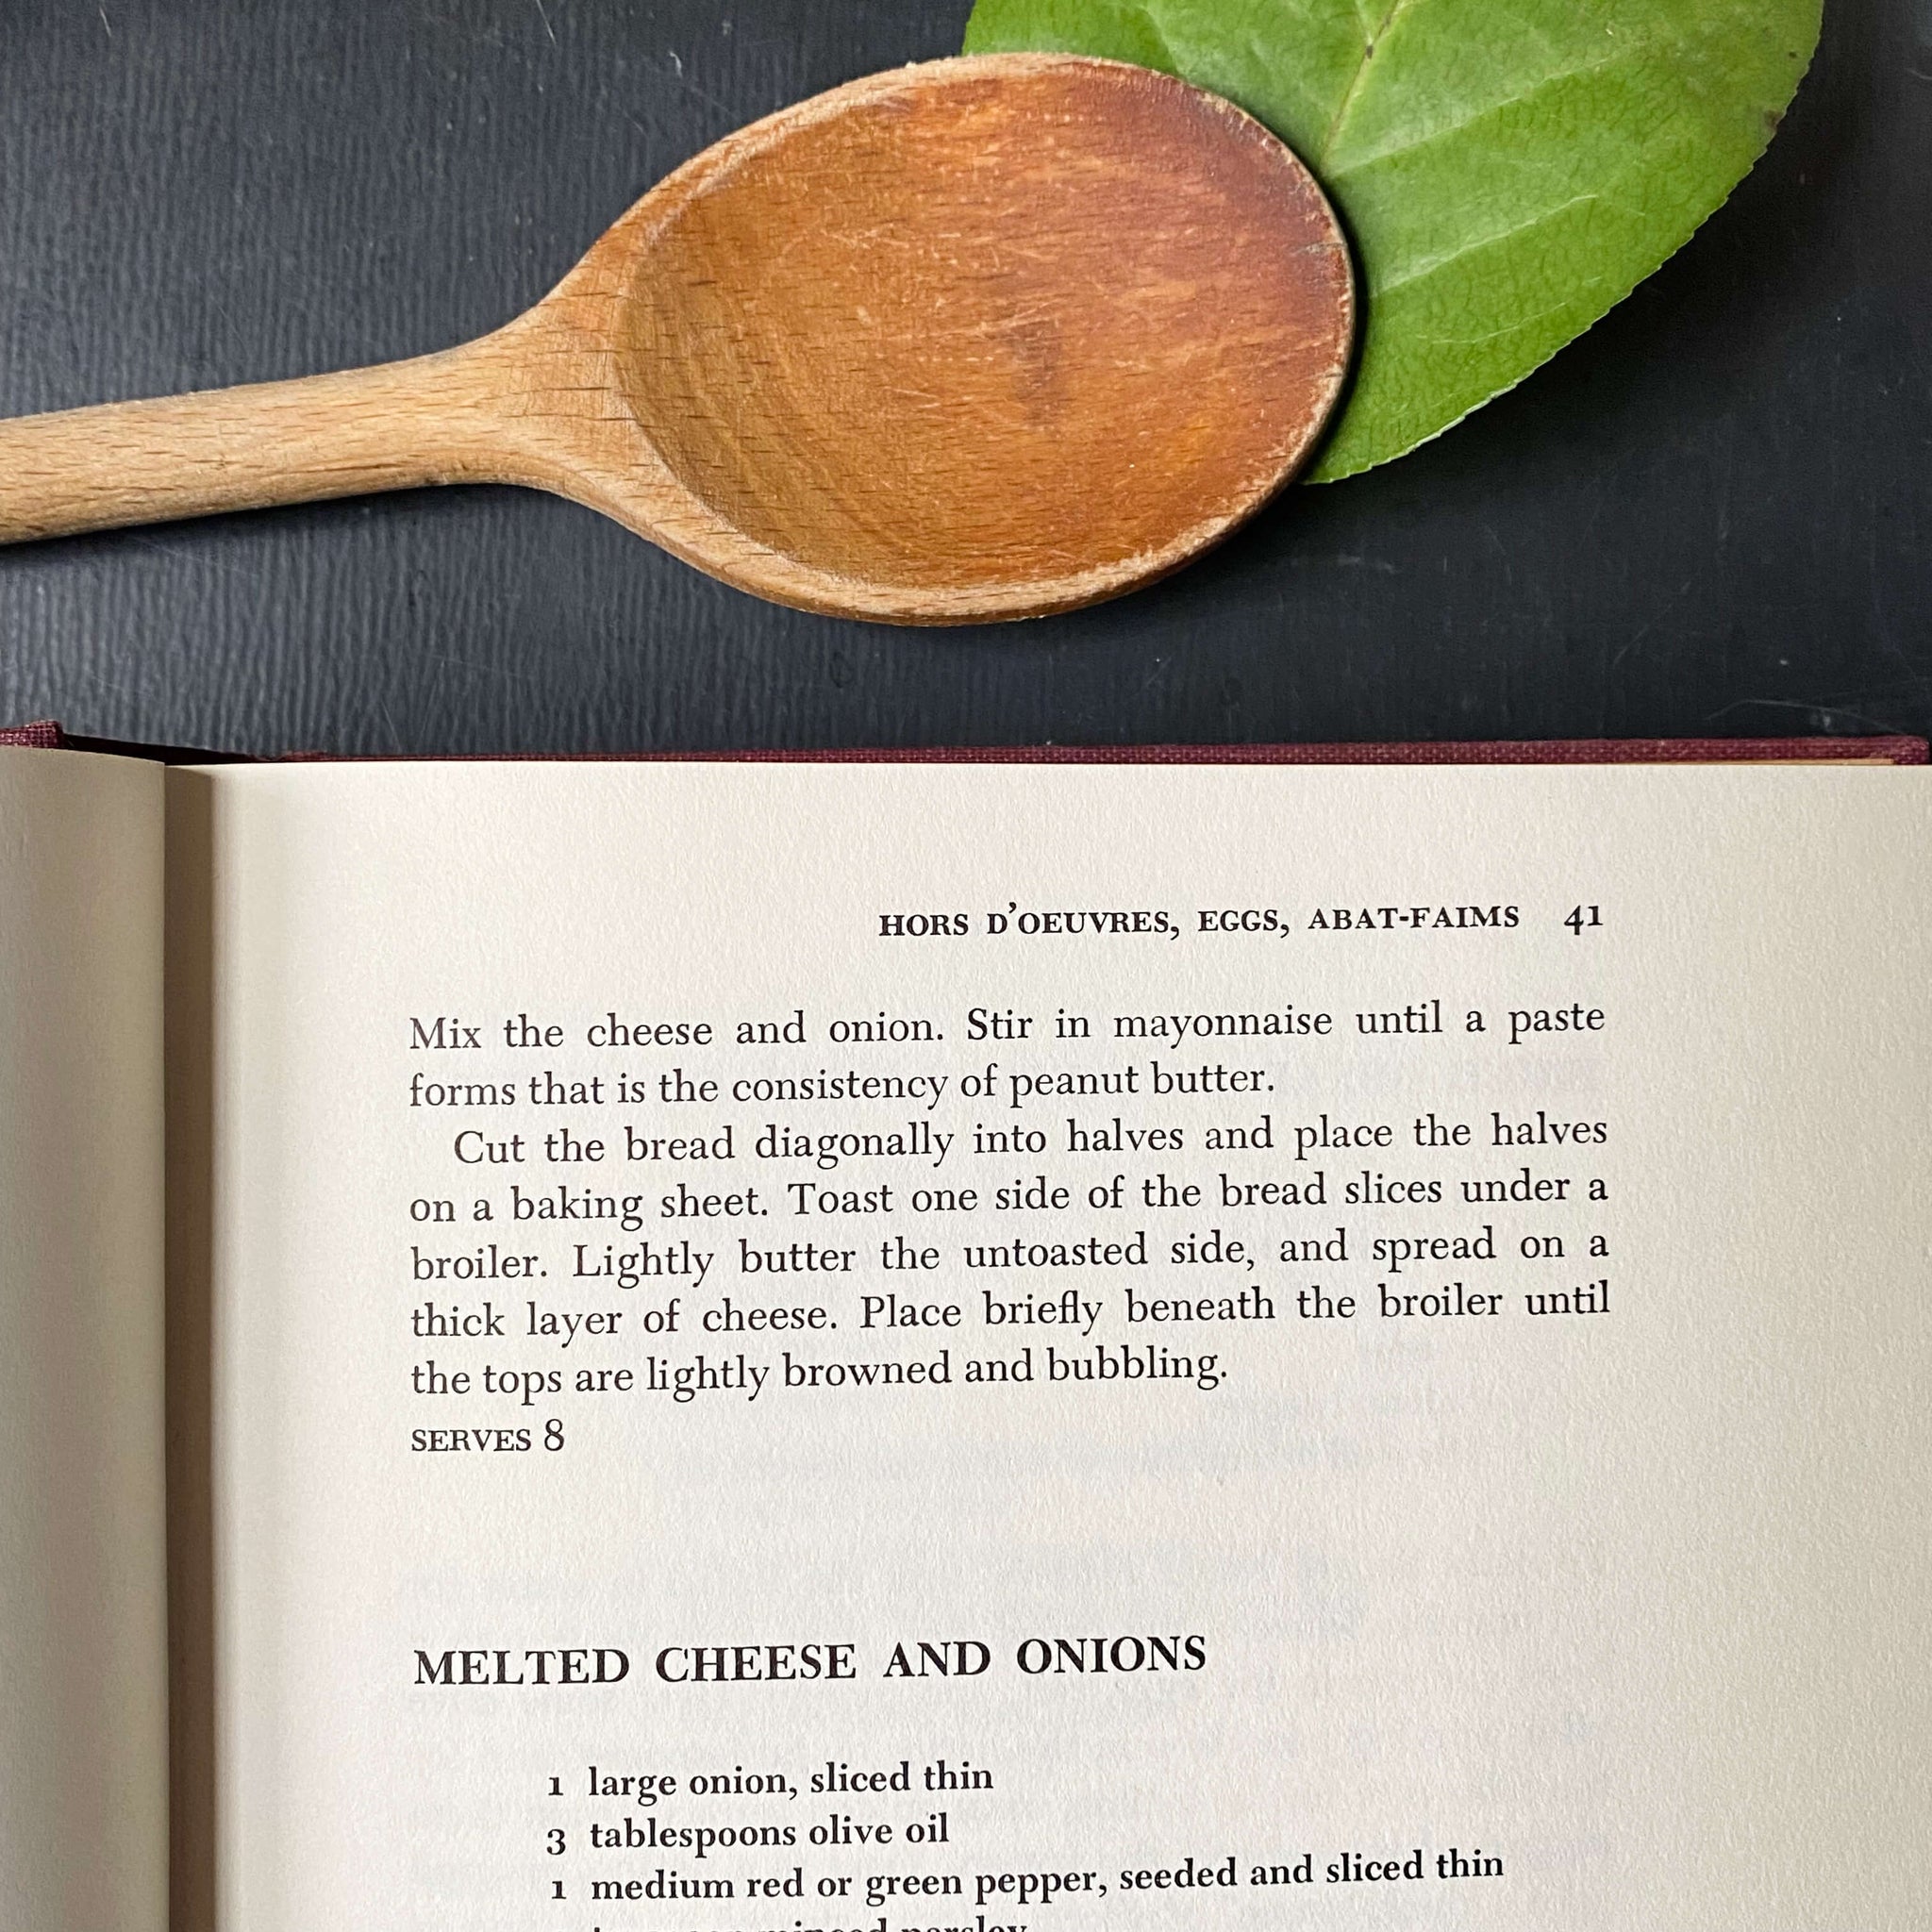 Comforting Food by Judith Olney - 1979 First Edition